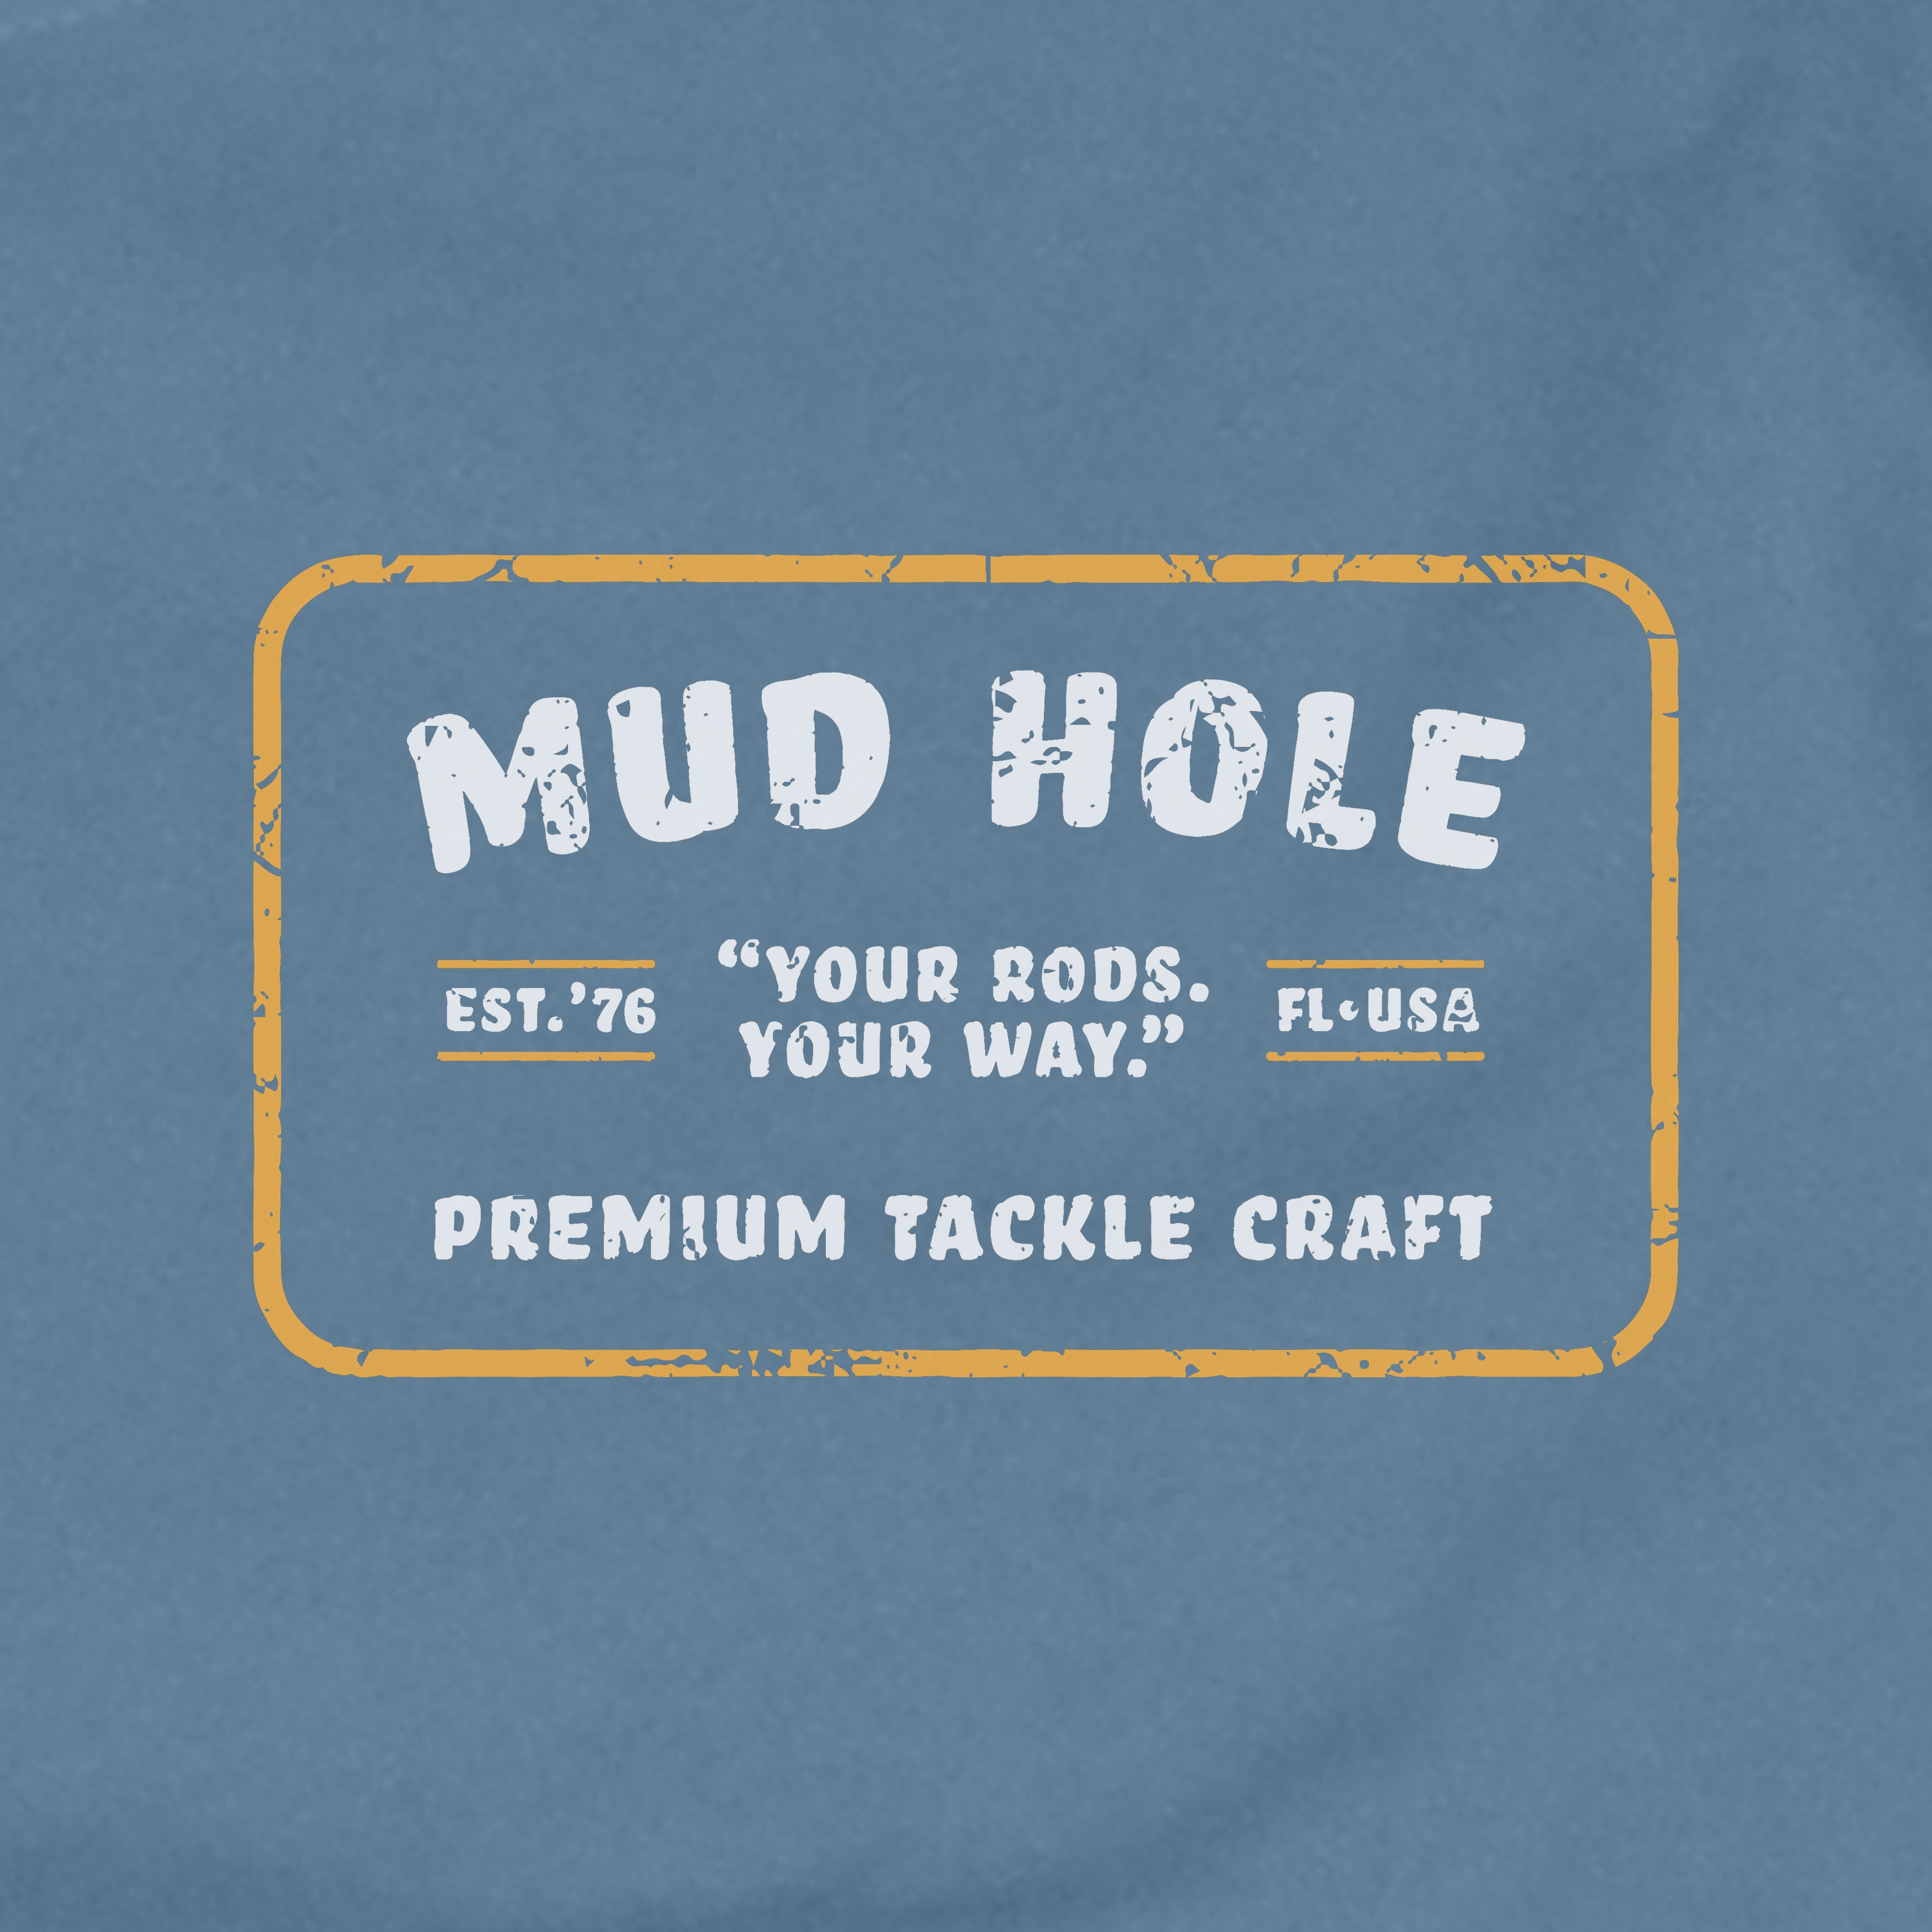 Mud Hole Built Not Bought 2-Color T-Shirt